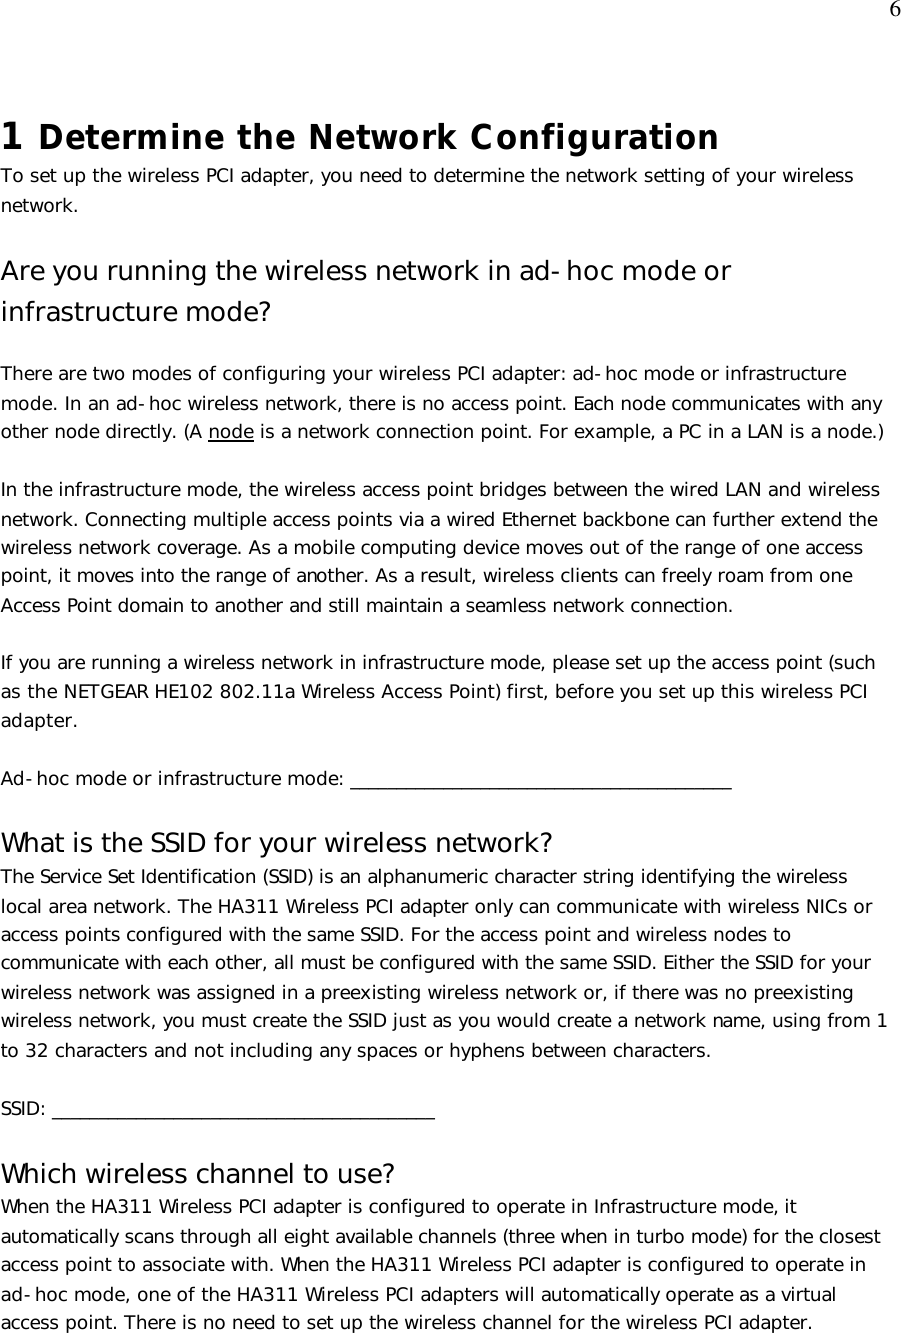  6 1 Determine the Network Configuration To set up the wireless PCI adapter, you need to determine the network setting of your wireless network.   Are you running the wireless network in ad-hoc mode or infrastructure mode?  There are two modes of configuring your wireless PCI adapter: ad-hoc mode or infrastructure mode. In an ad-hoc wireless network, there is no access point. Each node communicates with any other node directly. (A node is a network connection point. For example, a PC in a LAN is a node.)  In the infrastructure mode, the wireless access point bridges between the wired LAN and wireless network. Connecting multiple access points via a wired Ethernet backbone can further extend the wireless network coverage. As a mobile computing device moves out of the range of one access point, it moves into the range of another. As a result, wireless clients can freely roam from one Access Point domain to another and still maintain a seamless network connection.  If you are running a wireless network in infrastructure mode, please set up the access point (such as the NETGEAR HE102 802.11a Wireless Access Point) first, before you set up this wireless PCI adapter.  Ad-hoc mode or infrastructure mode: _________________________________________  What is the SSID for your wireless network? The Service Set Identification (SSID) is an alphanumeric character string identifying the wireless local area network. The HA311 Wireless PCI adapter only can communicate with wireless NICs or access points configured with the same SSID. For the access point and wireless nodes to communicate with each other, all must be configured with the same SSID. Either the SSID for your wireless network was assigned in a preexisting wireless network or, if there was no preexisting wireless network, you must create the SSID just as you would create a network name, using from 1 to 32 characters and not including any spaces or hyphens between characters.  SSID: _________________________________________  Which wireless channel to use?  When the HA311 Wireless PCI adapter is configured to operate in Infrastructure mode, it automatically scans through all eight available channels (three when in turbo mode) for the closest access point to associate with. When the HA311 Wireless PCI adapter is configured to operate in ad-hoc mode, one of the HA311 Wireless PCI adapters will automatically operate as a virtual access point. There is no need to set up the wireless channel for the wireless PCI adapter.   